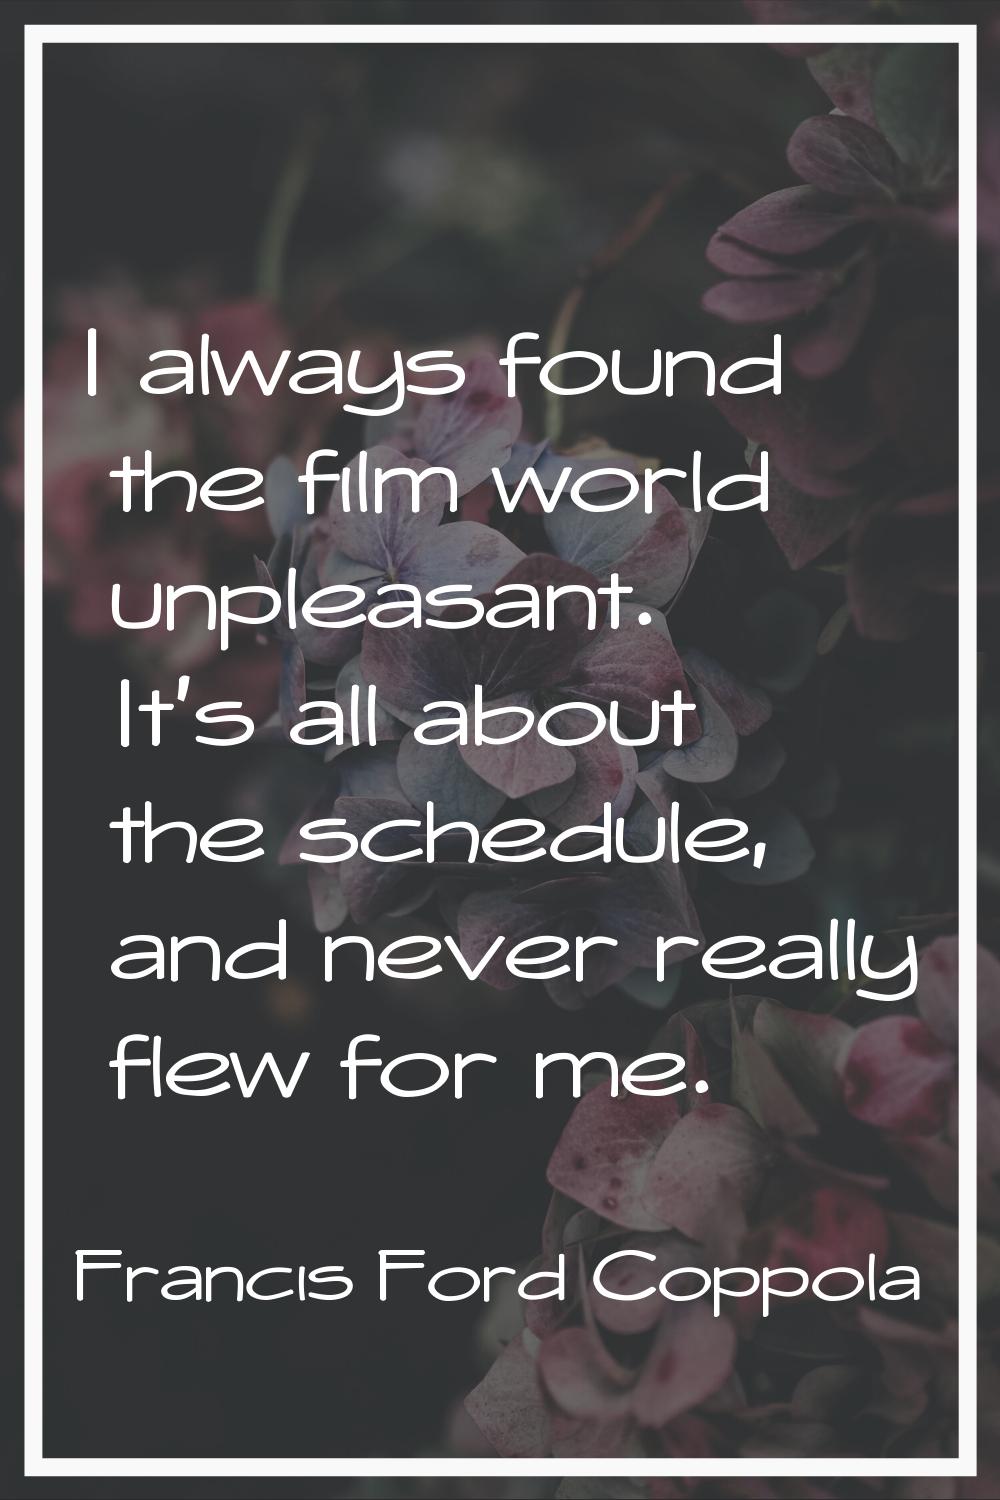 I always found the film world unpleasant. It's all about the schedule, and never really flew for me